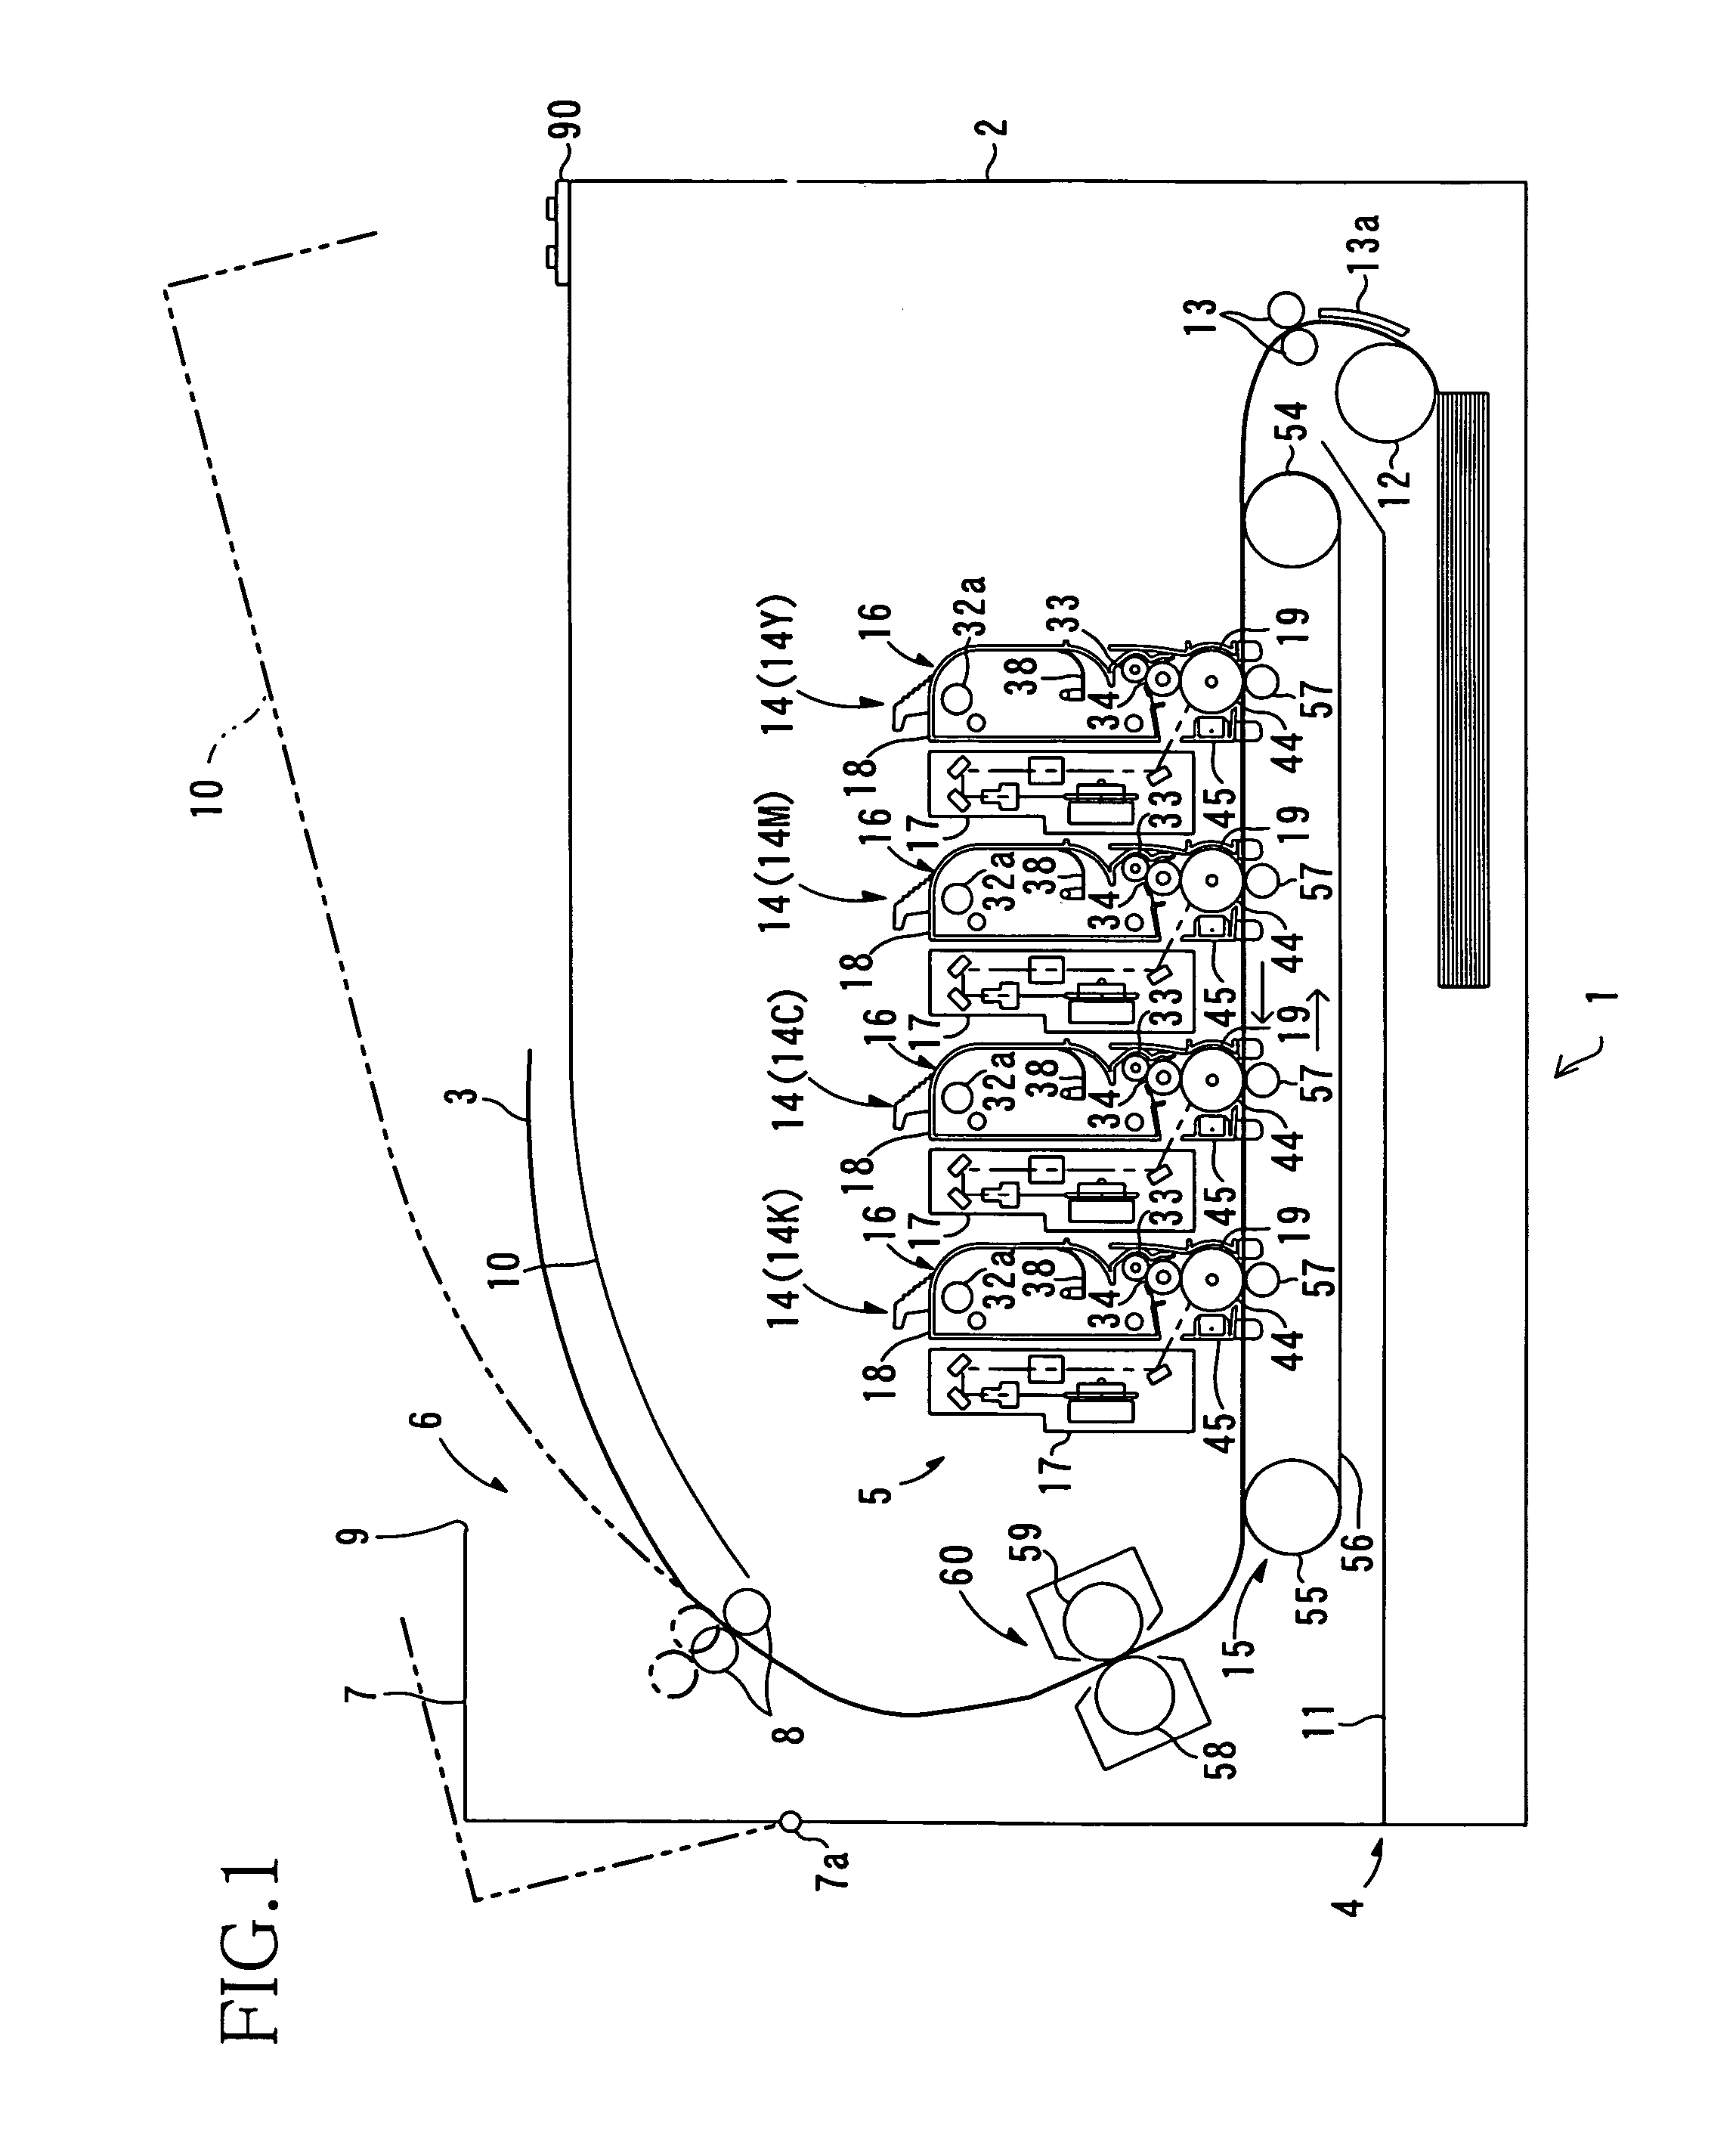 Image forming apparatus with processing unit that can be removed from the image forming apparatus without removing exposing devices